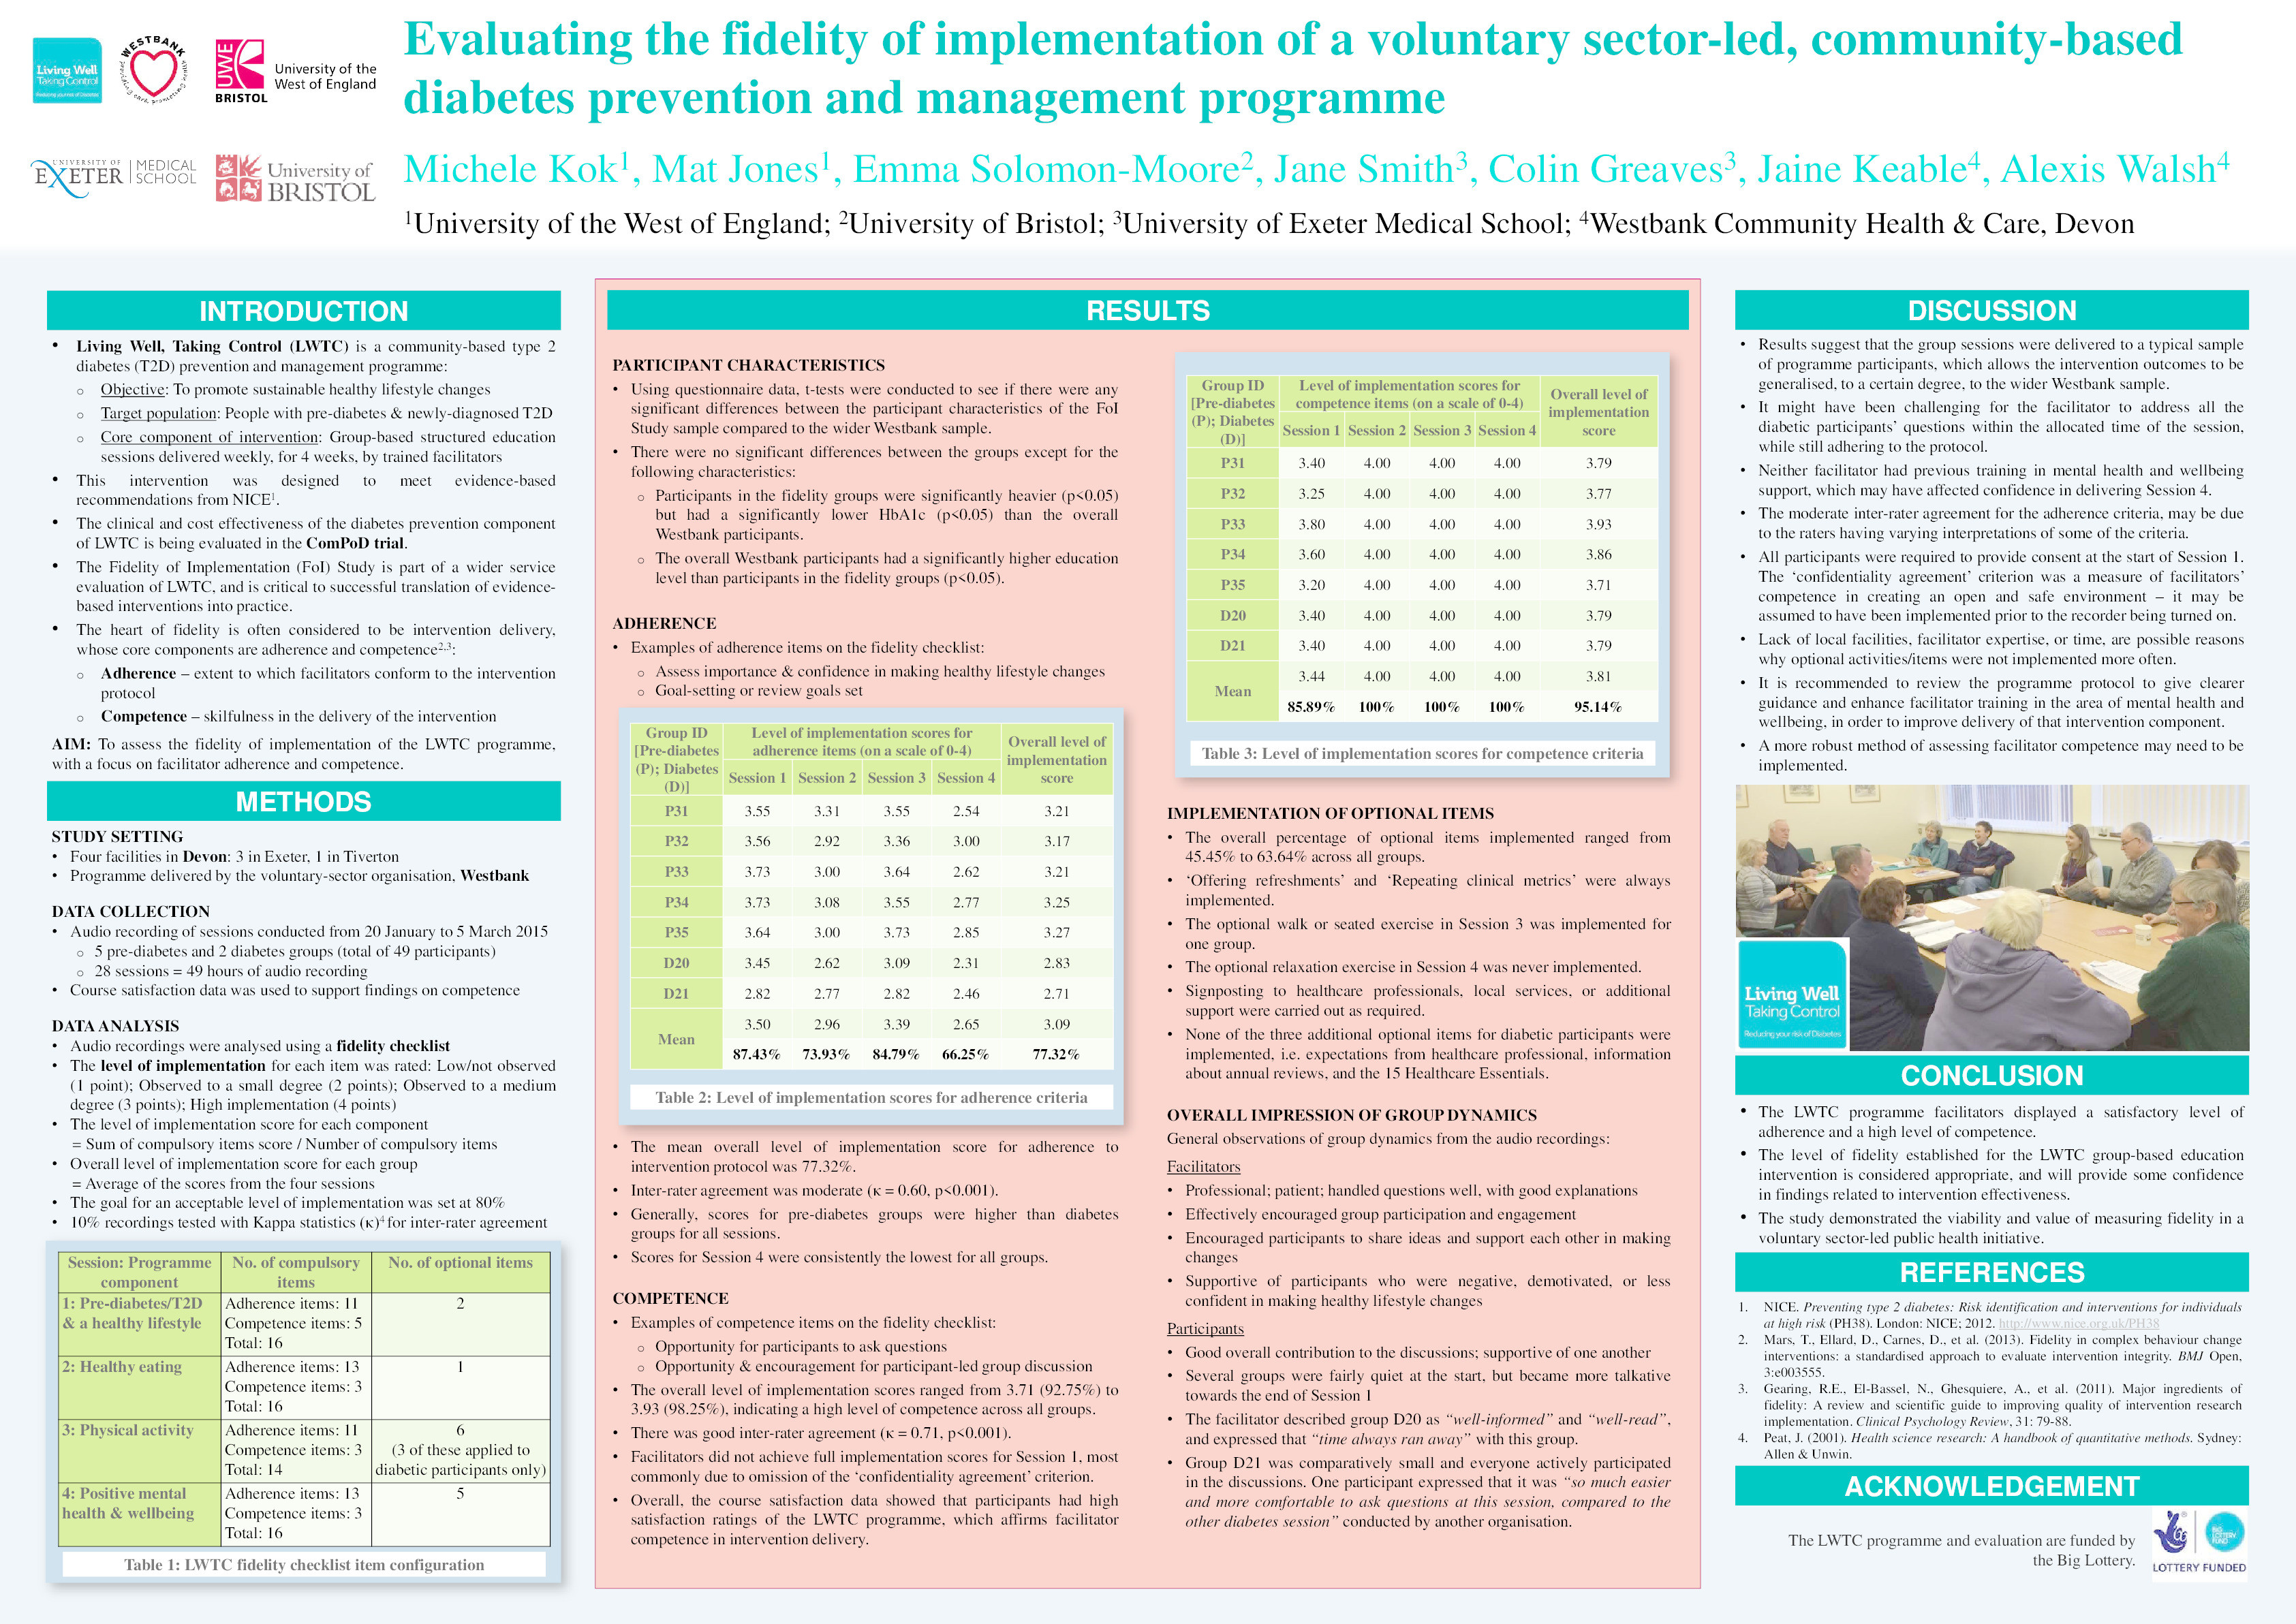 Evaluating the fidelity of implementation of a voluntary sector-led, community-based diabetes prevention and management programme Thumbnail